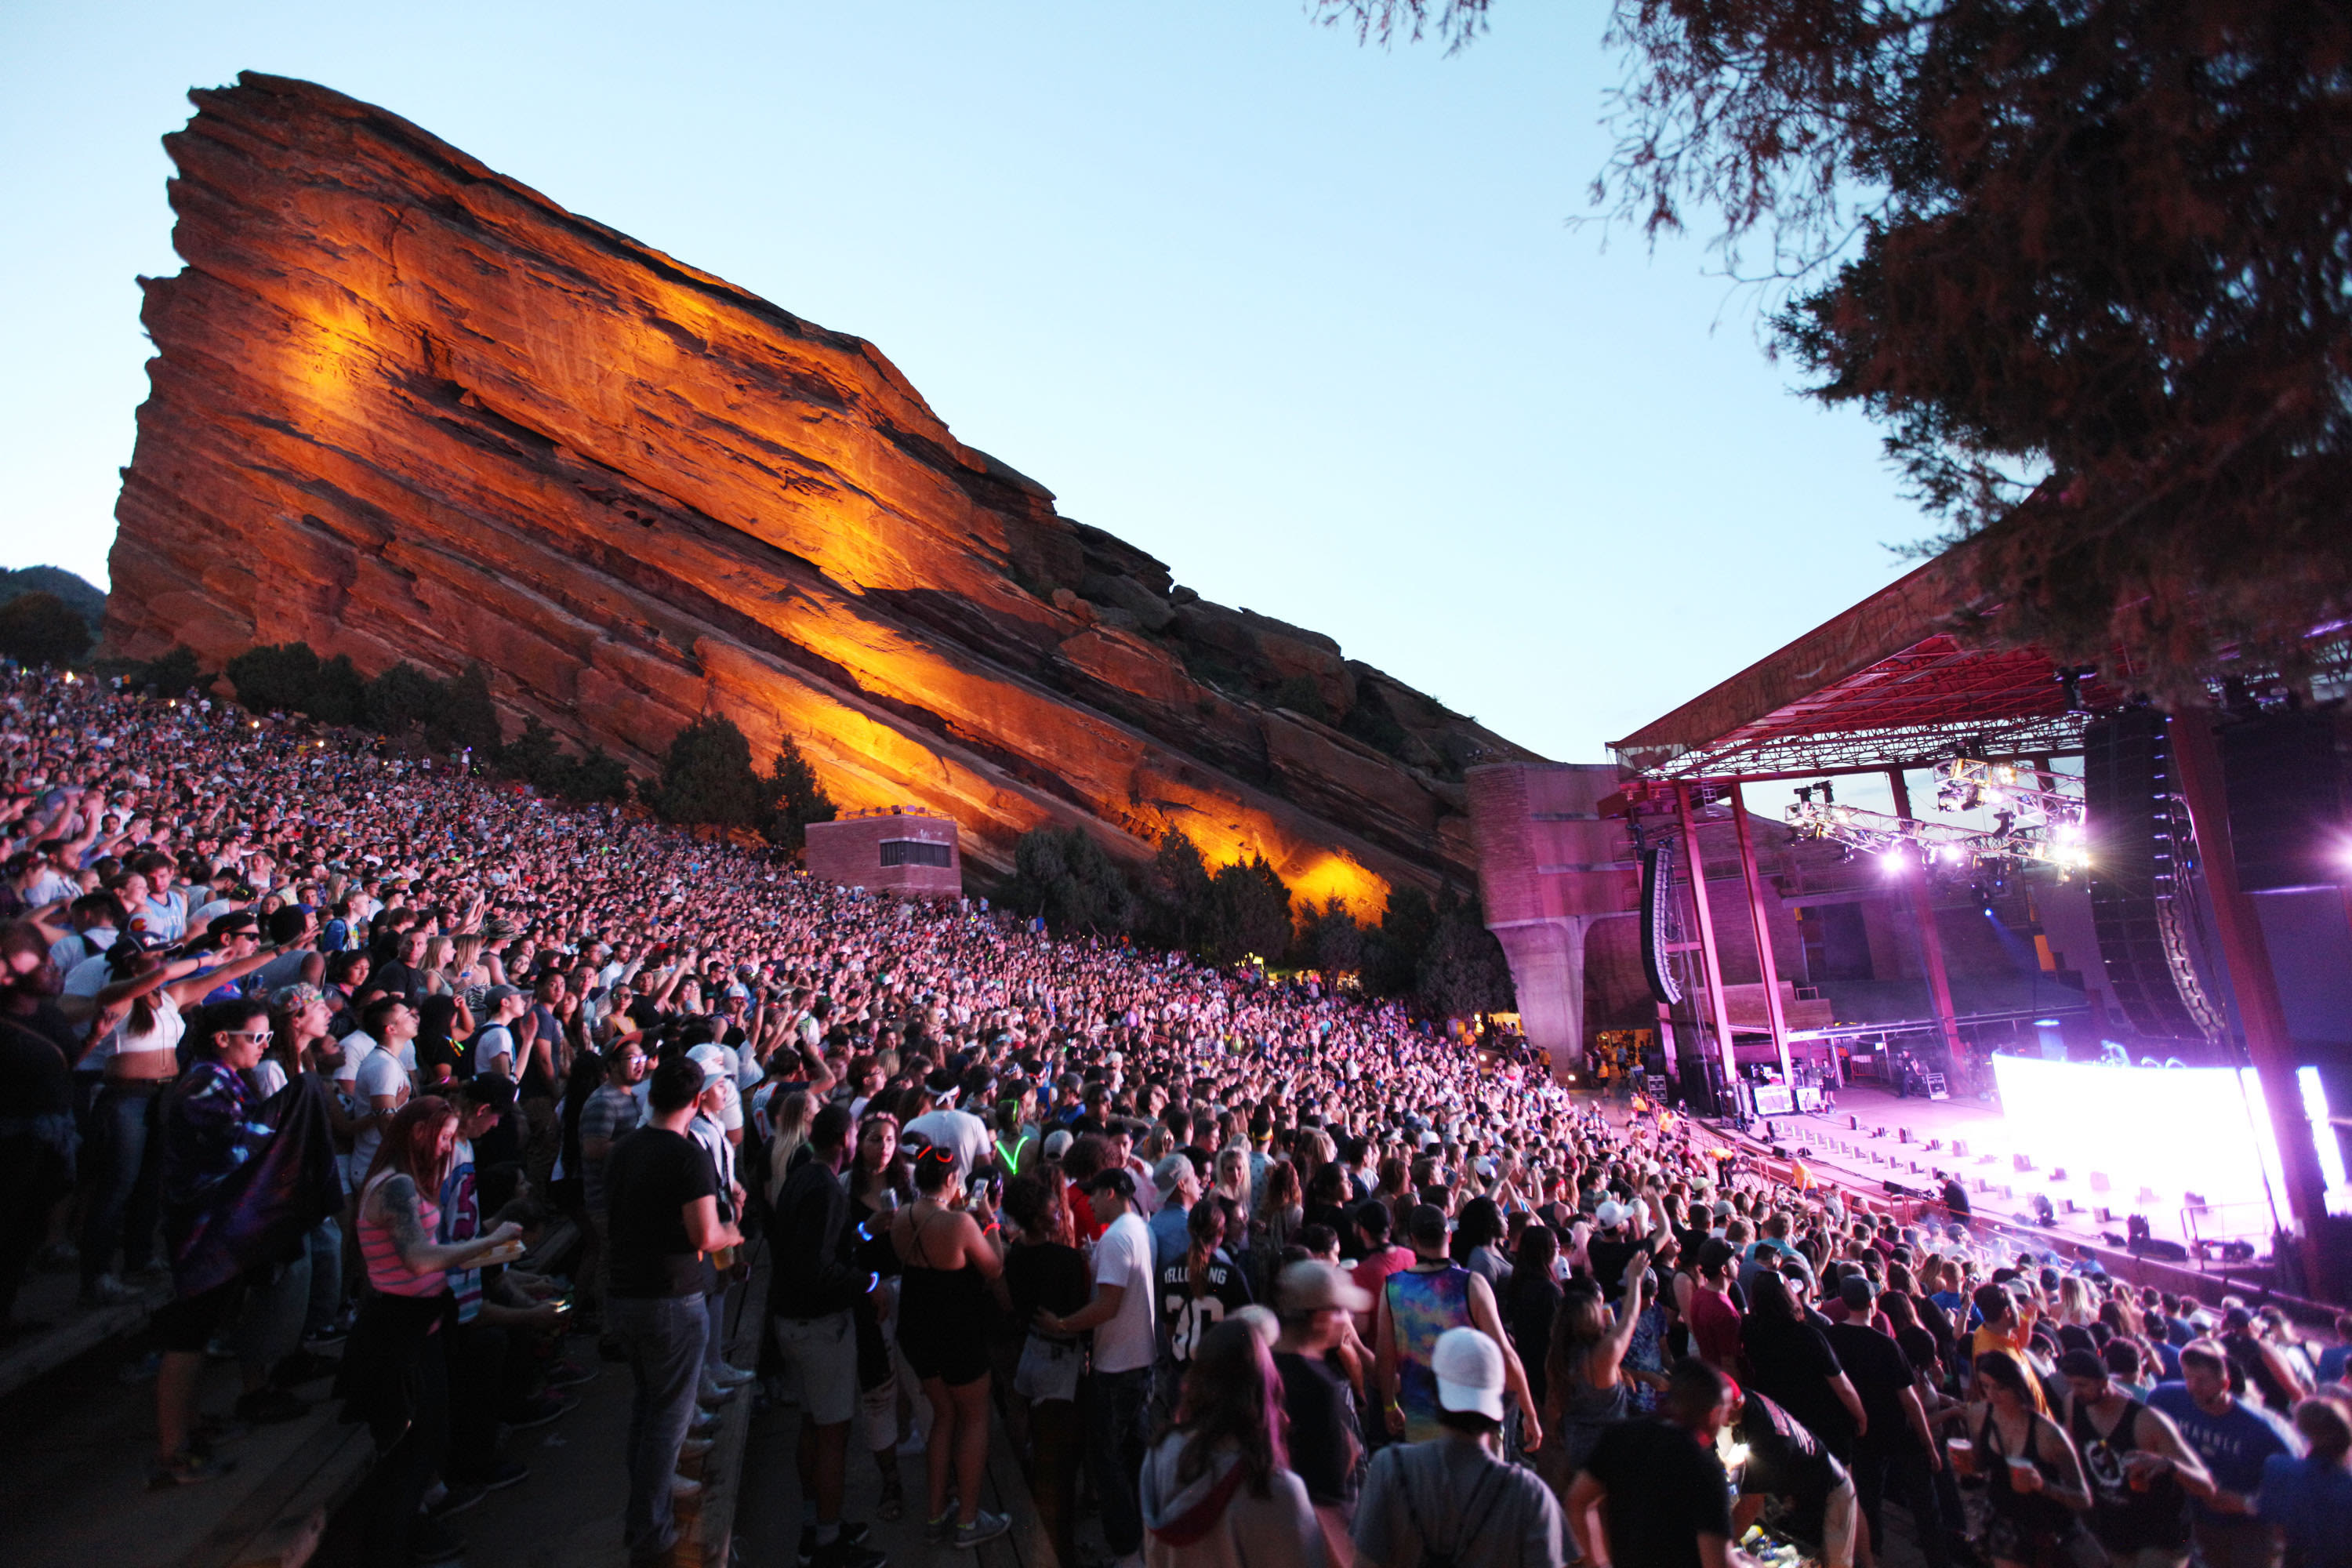 The It List summer guide: America's best outdoor music venues